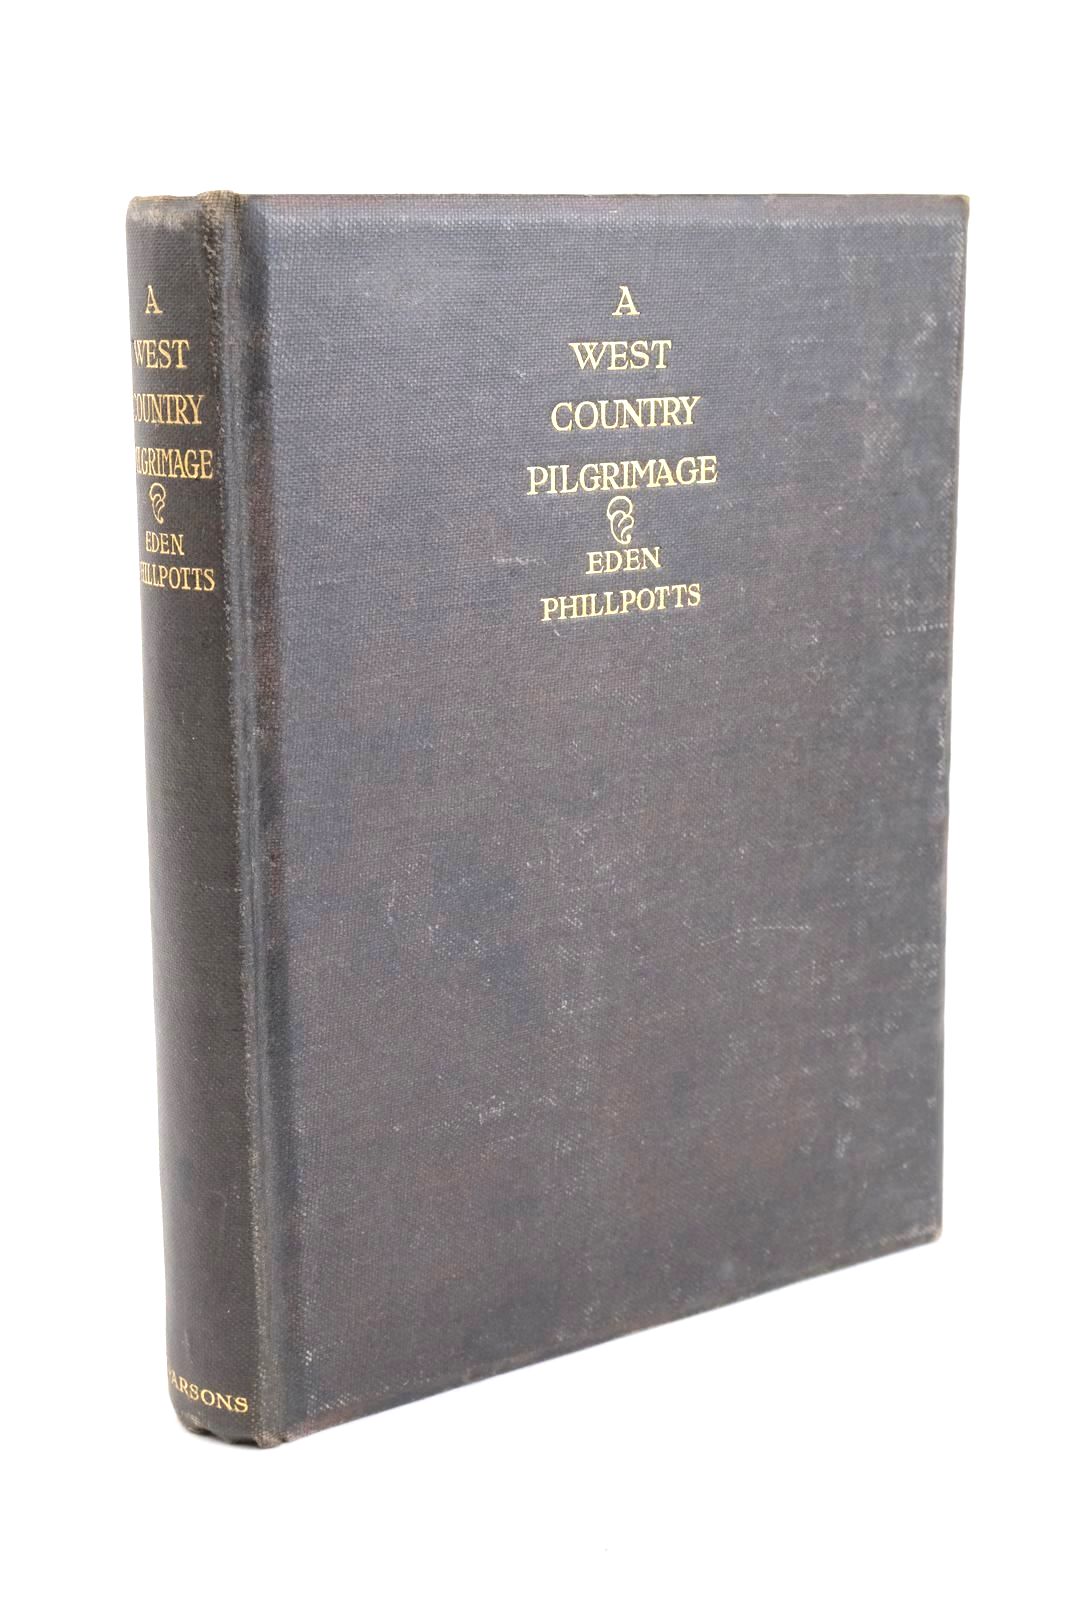 Photo of A WEST COUNTRY PILGRIMAGE written by Phillpotts, Eden illustrated by Benthall, A.T. published by Leonard Parsons (STOCK CODE: 1327770)  for sale by Stella & Rose's Books